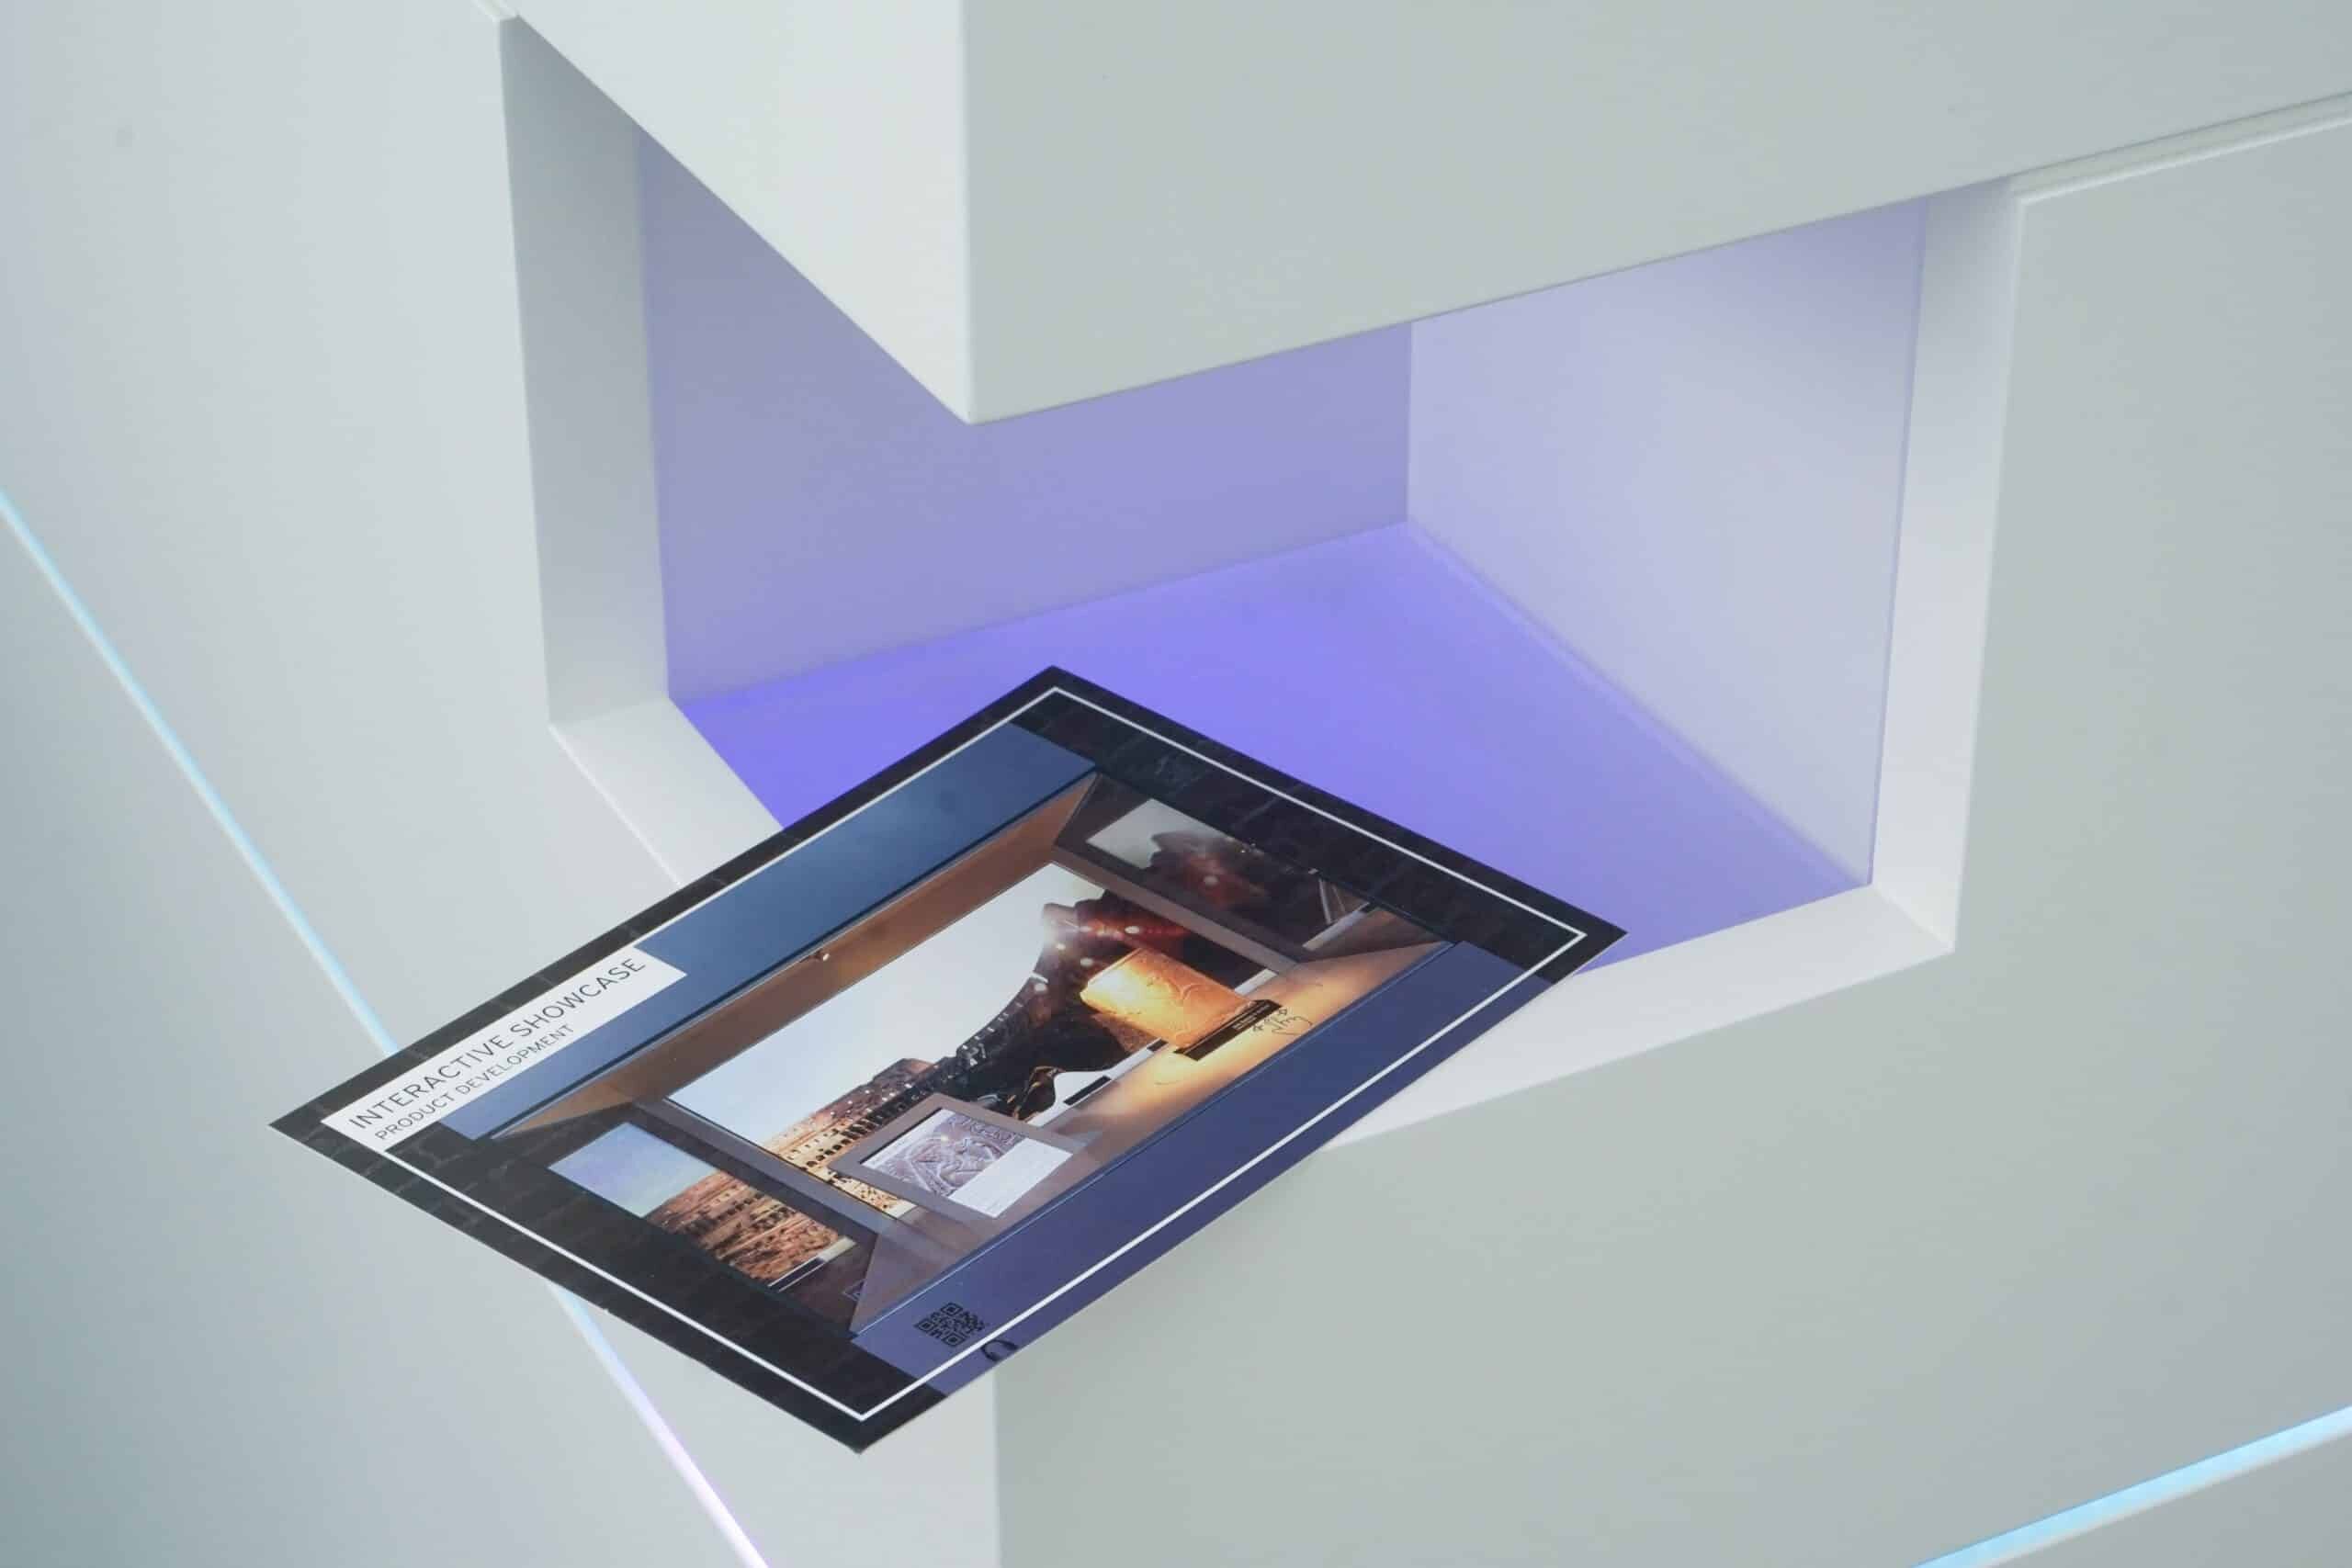 Multitouch scanner table optically detects objects